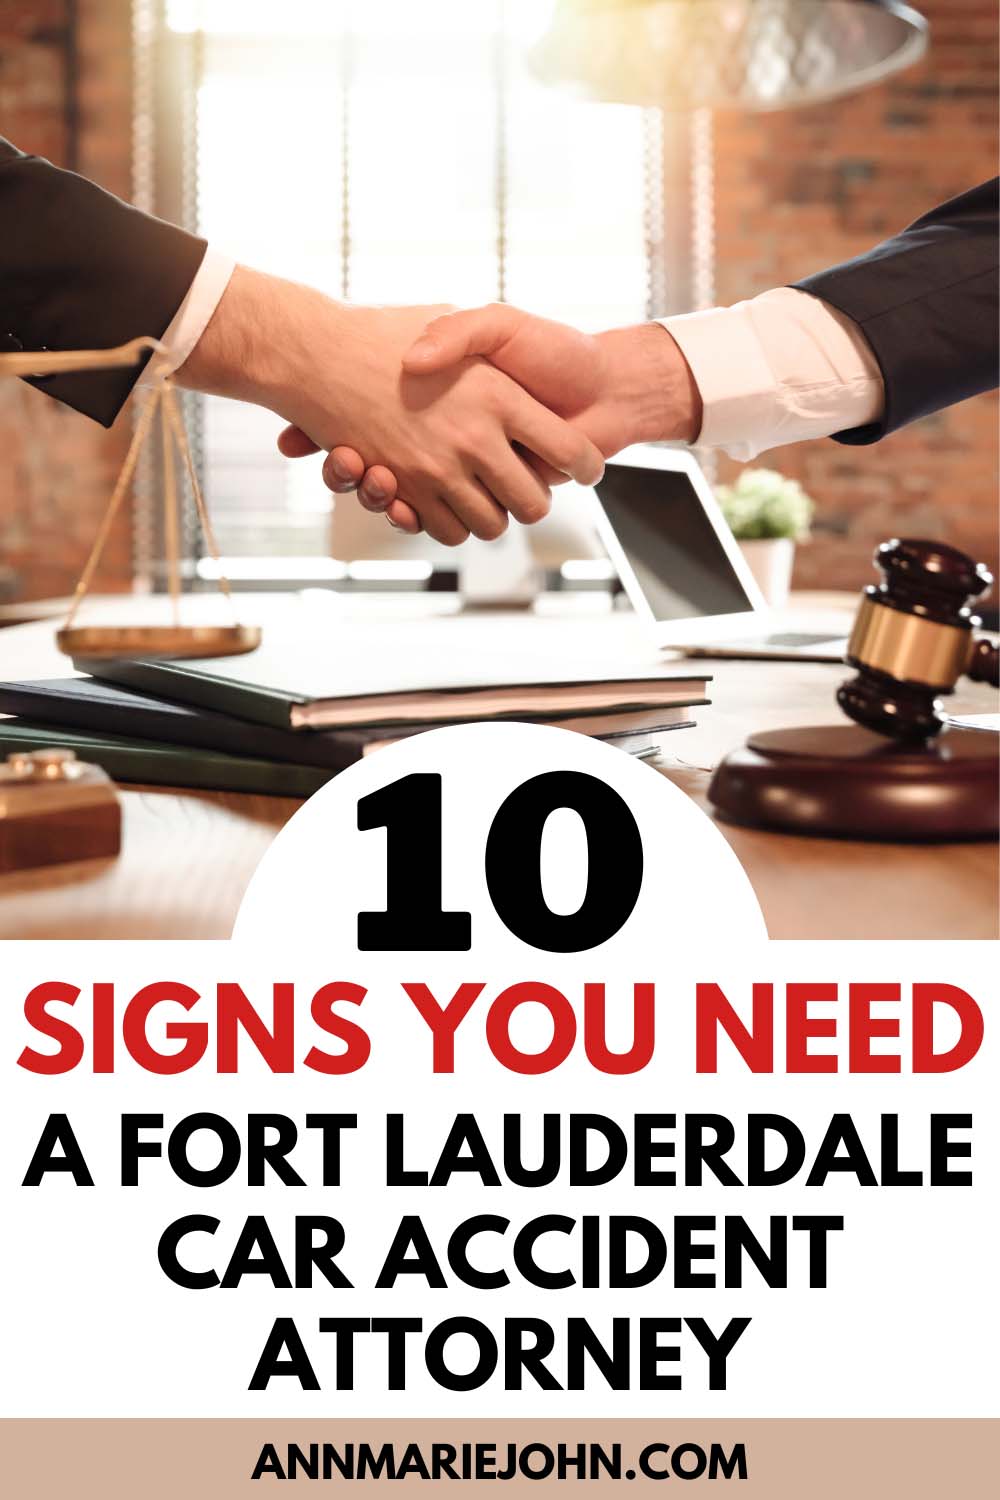 Signs You Need a Fort Lauderdale Car Accident Attorney